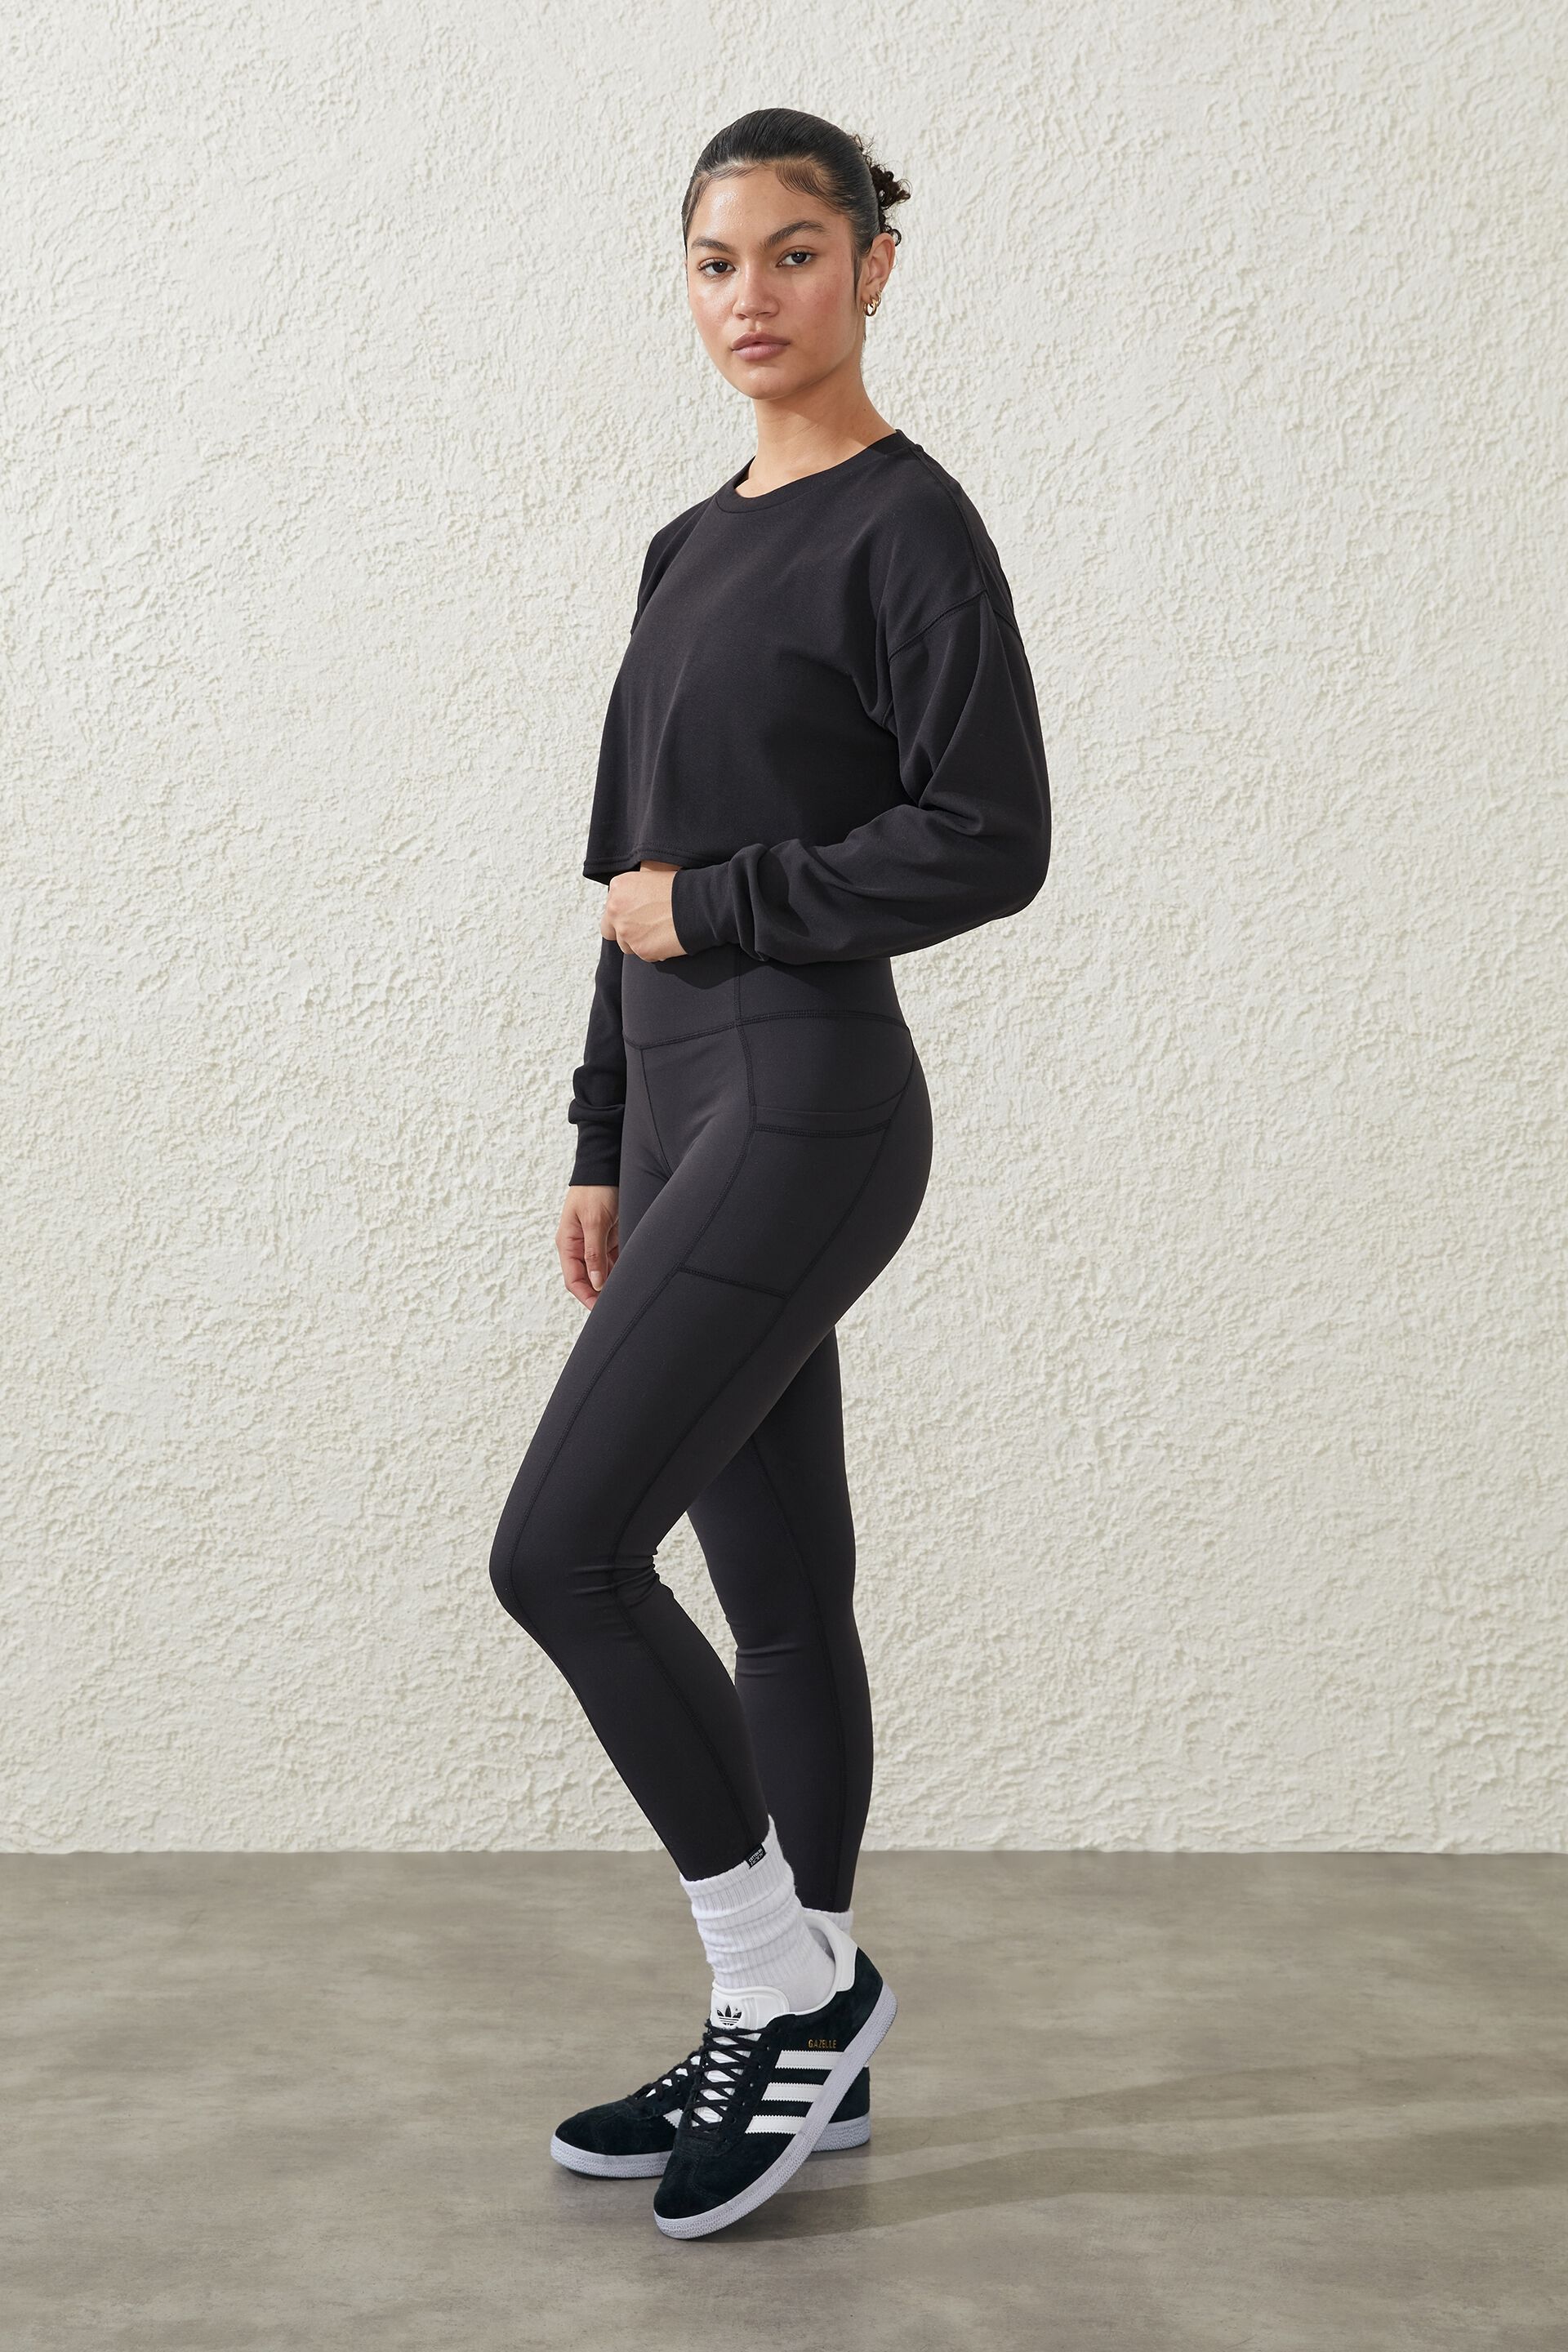 Women's Leggings, Tights & Sports Clothes | Cotton On